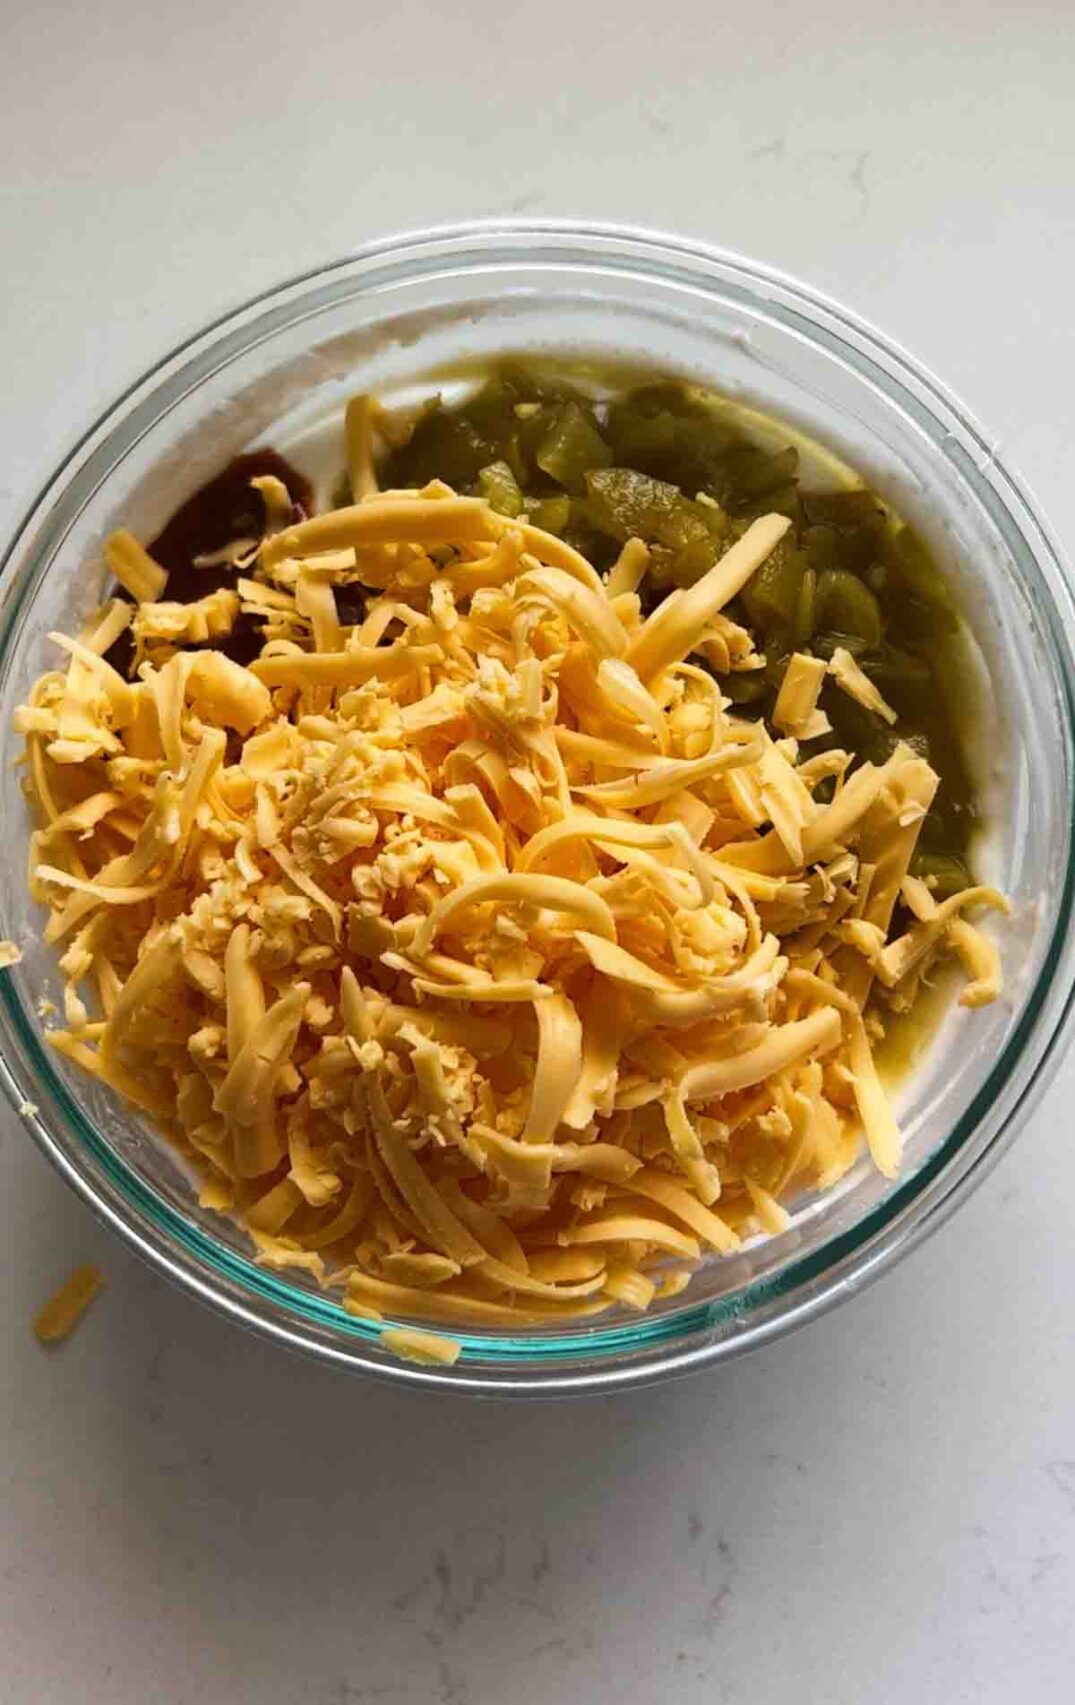 shredded cheese, hatch green chiles, hot sauce and whipped cottage cheese in a glass bowl.